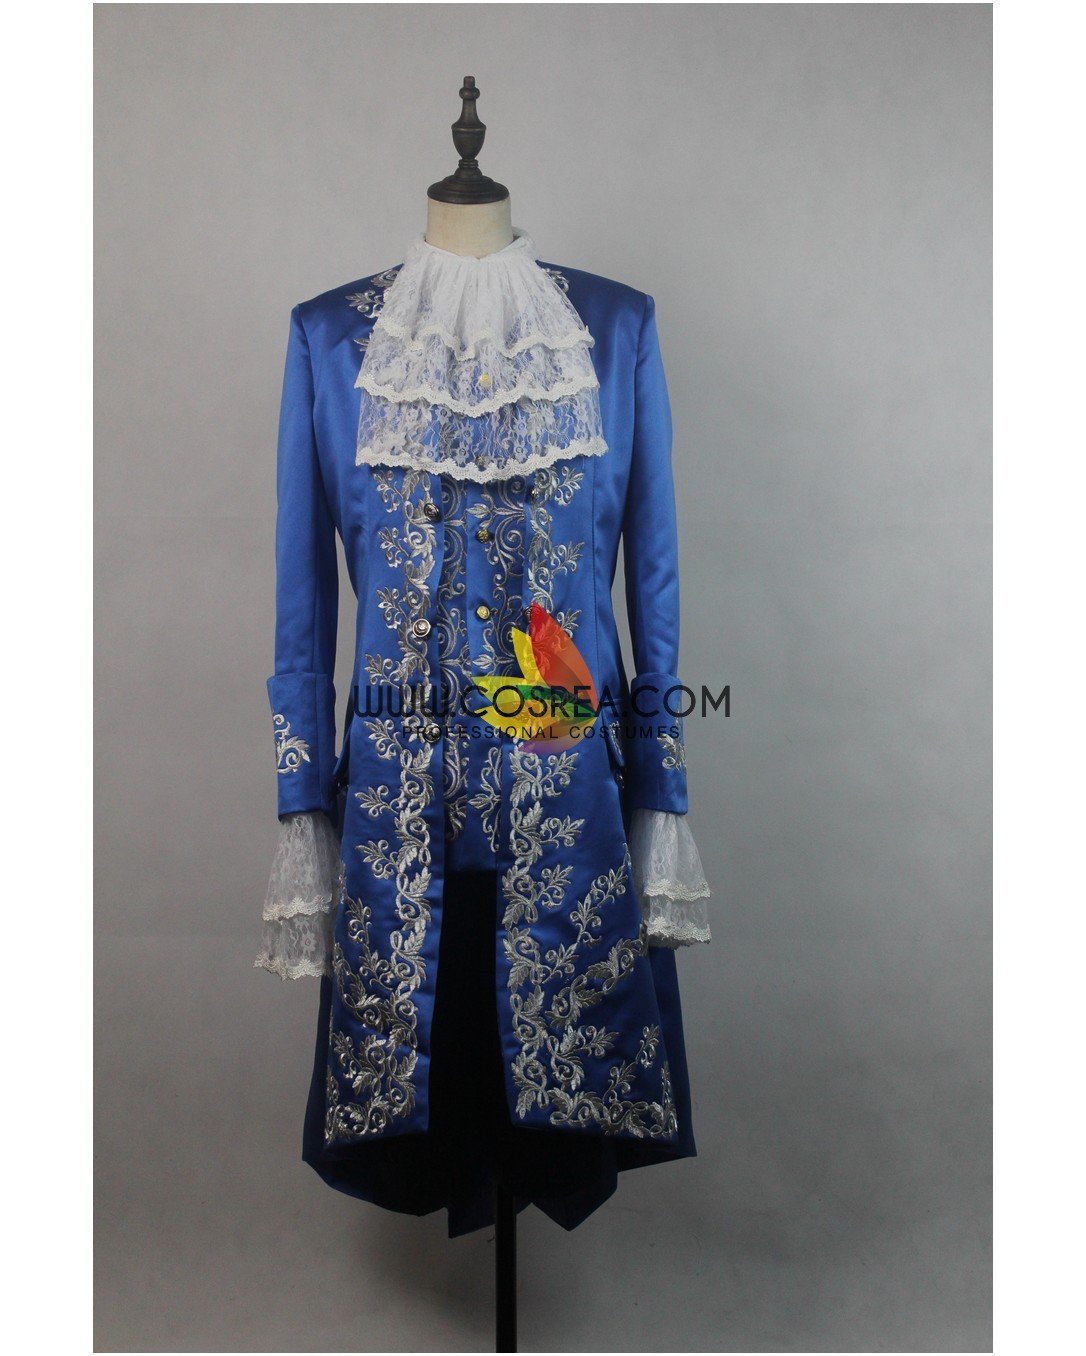 Beast Live Action Movie Formal Embroidered Cosplay Costume